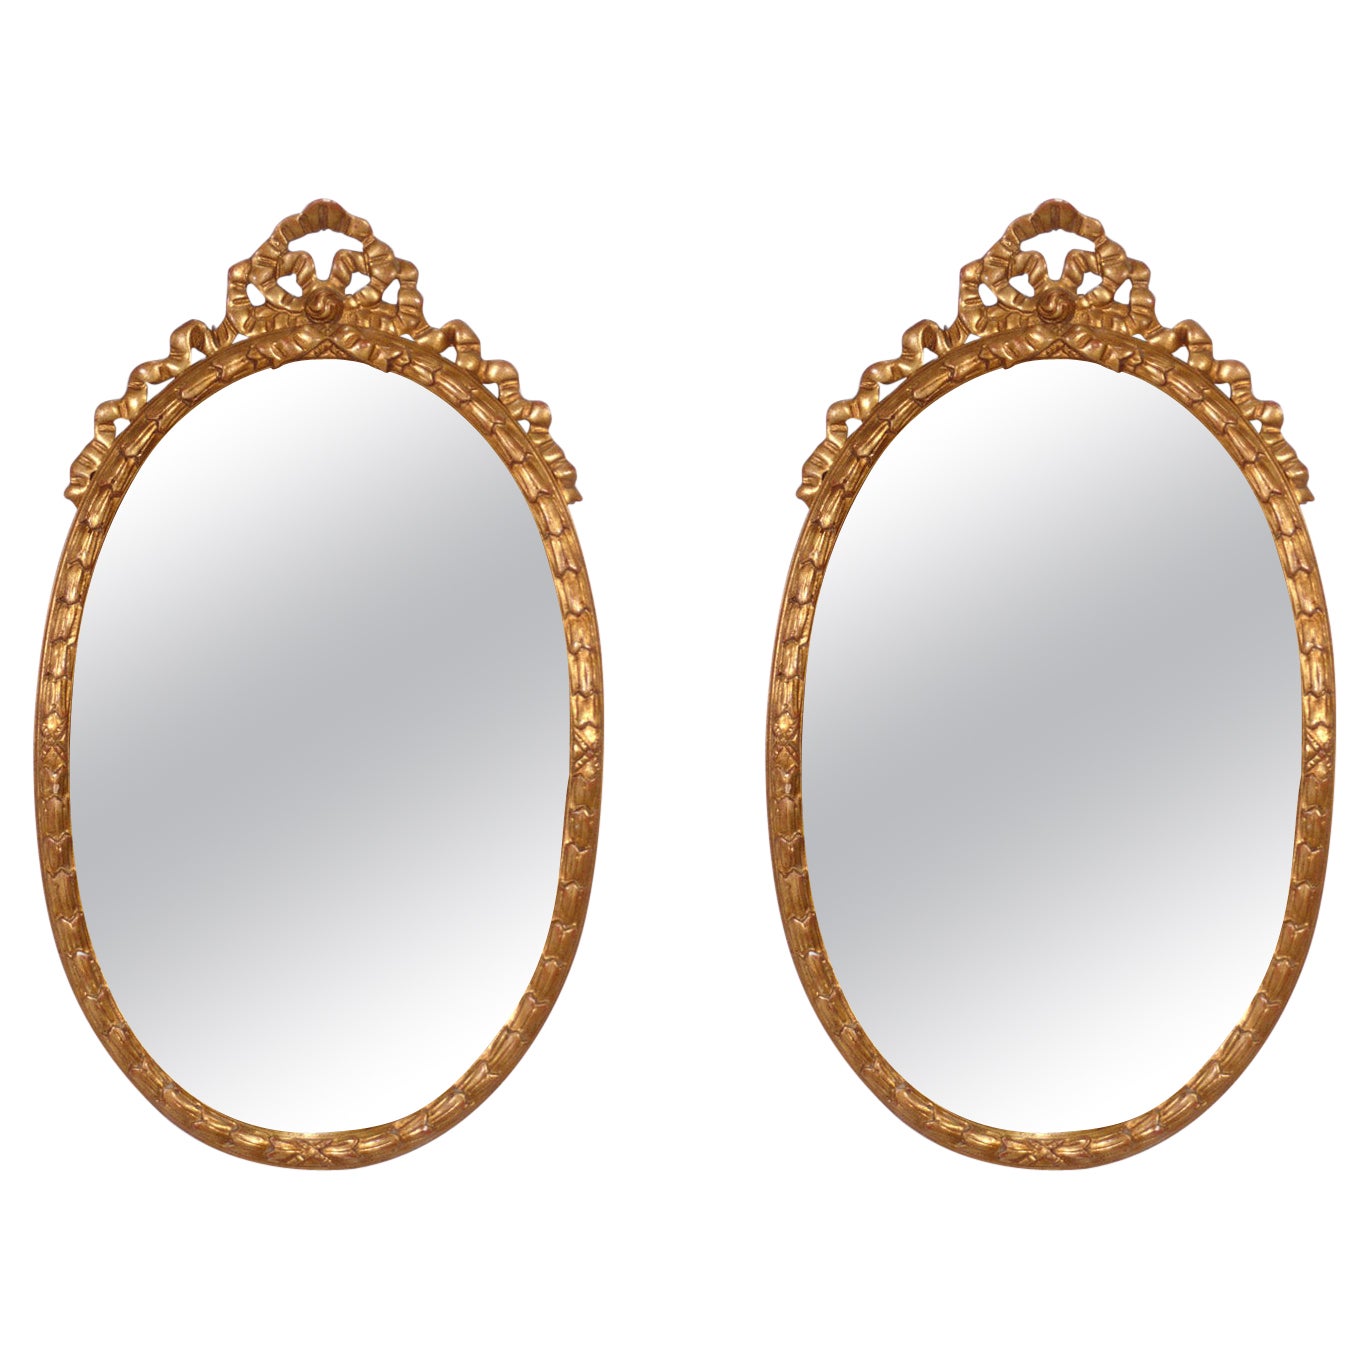 Pair of Gilt Rococo Style Oval Italian Mirrors from The Carlyle Hotel NYC For Sale